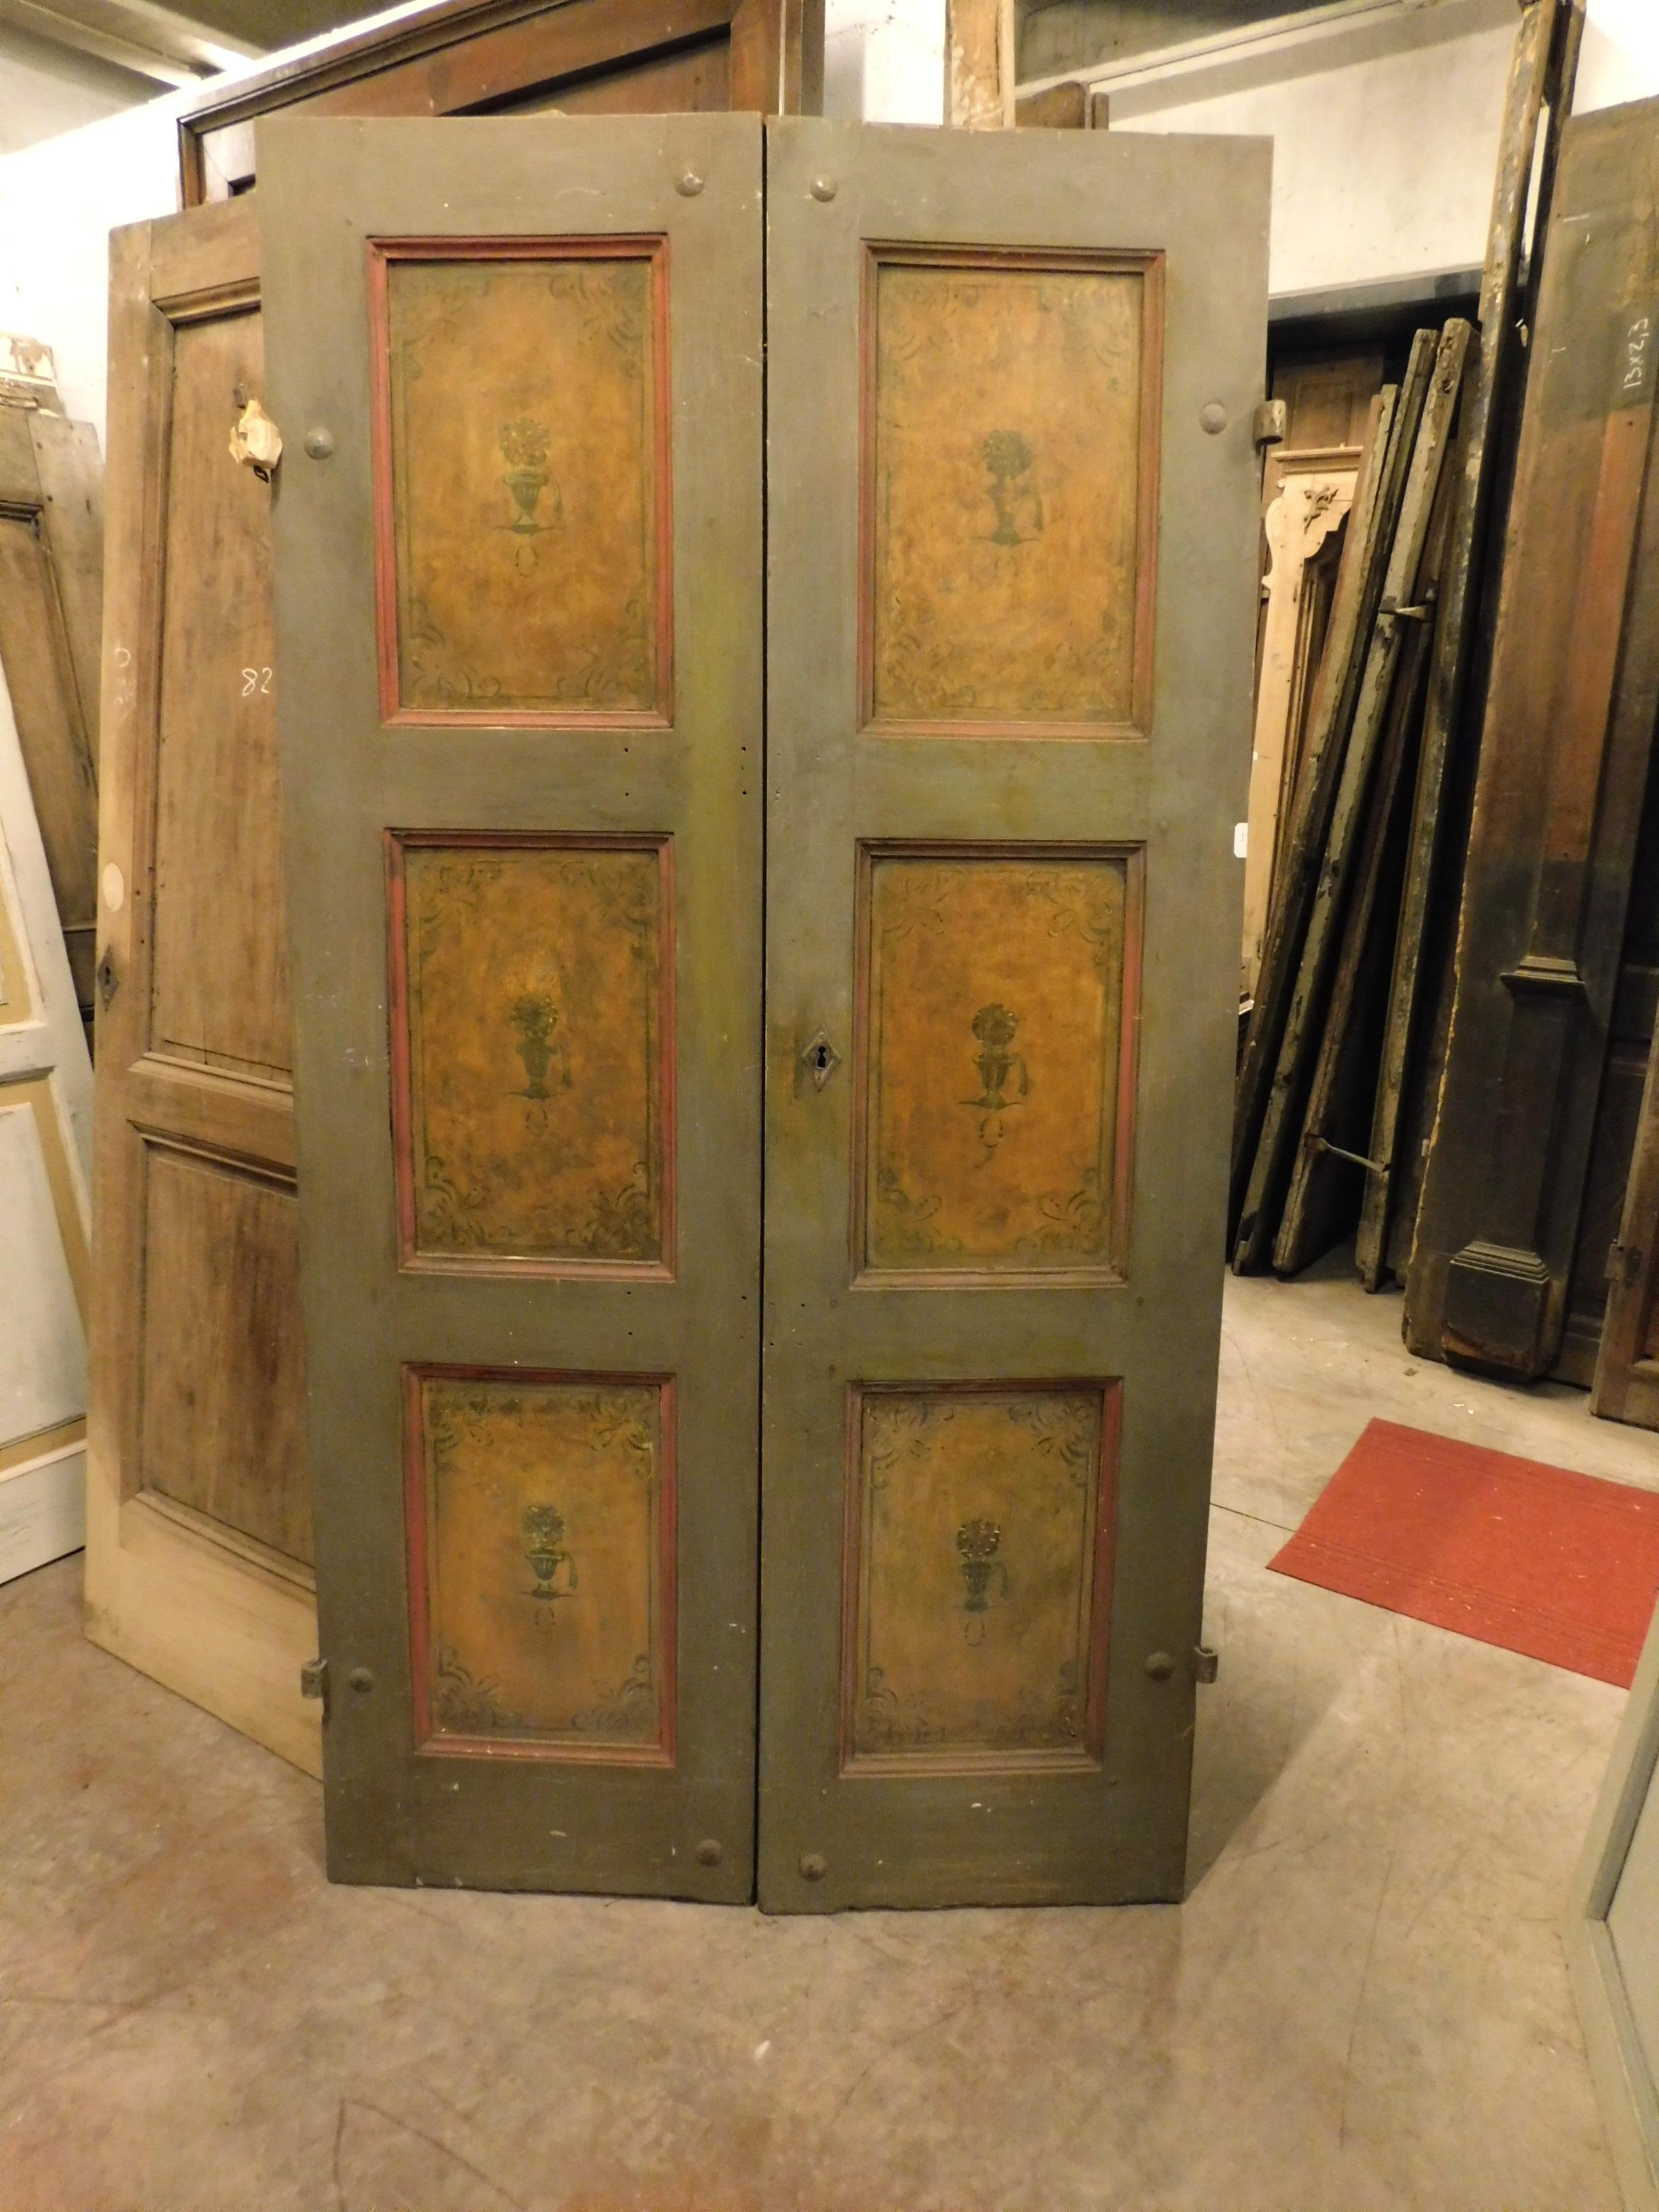 Ancient lacquered double-leaf door, lacquered and painted on both sides, painted lozenges and scenes on the panels, with original ironwork and in good condition, built and lacquered by hand in the 19th century, from Italy, size cm W 108 x H